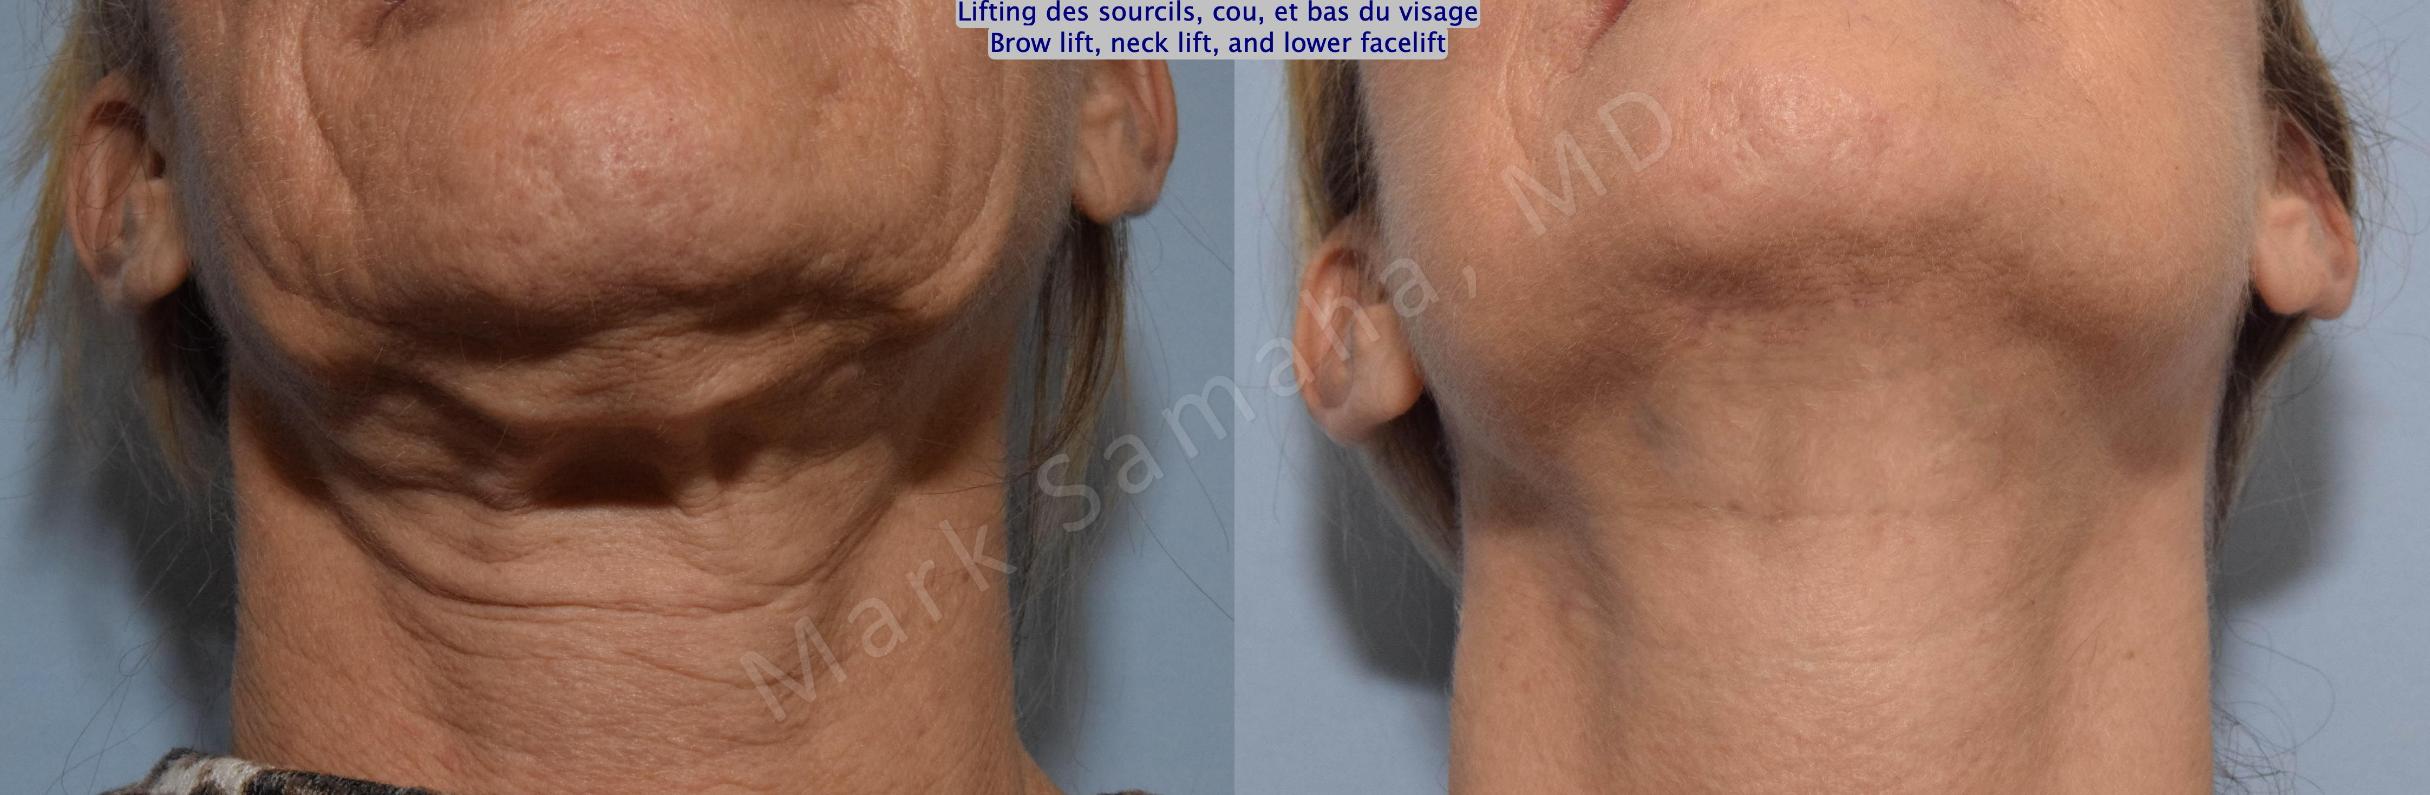 Before & After Lifting du Sourcil / Brow lift Case 145 Neck/Cou View in Mount Royal, QC